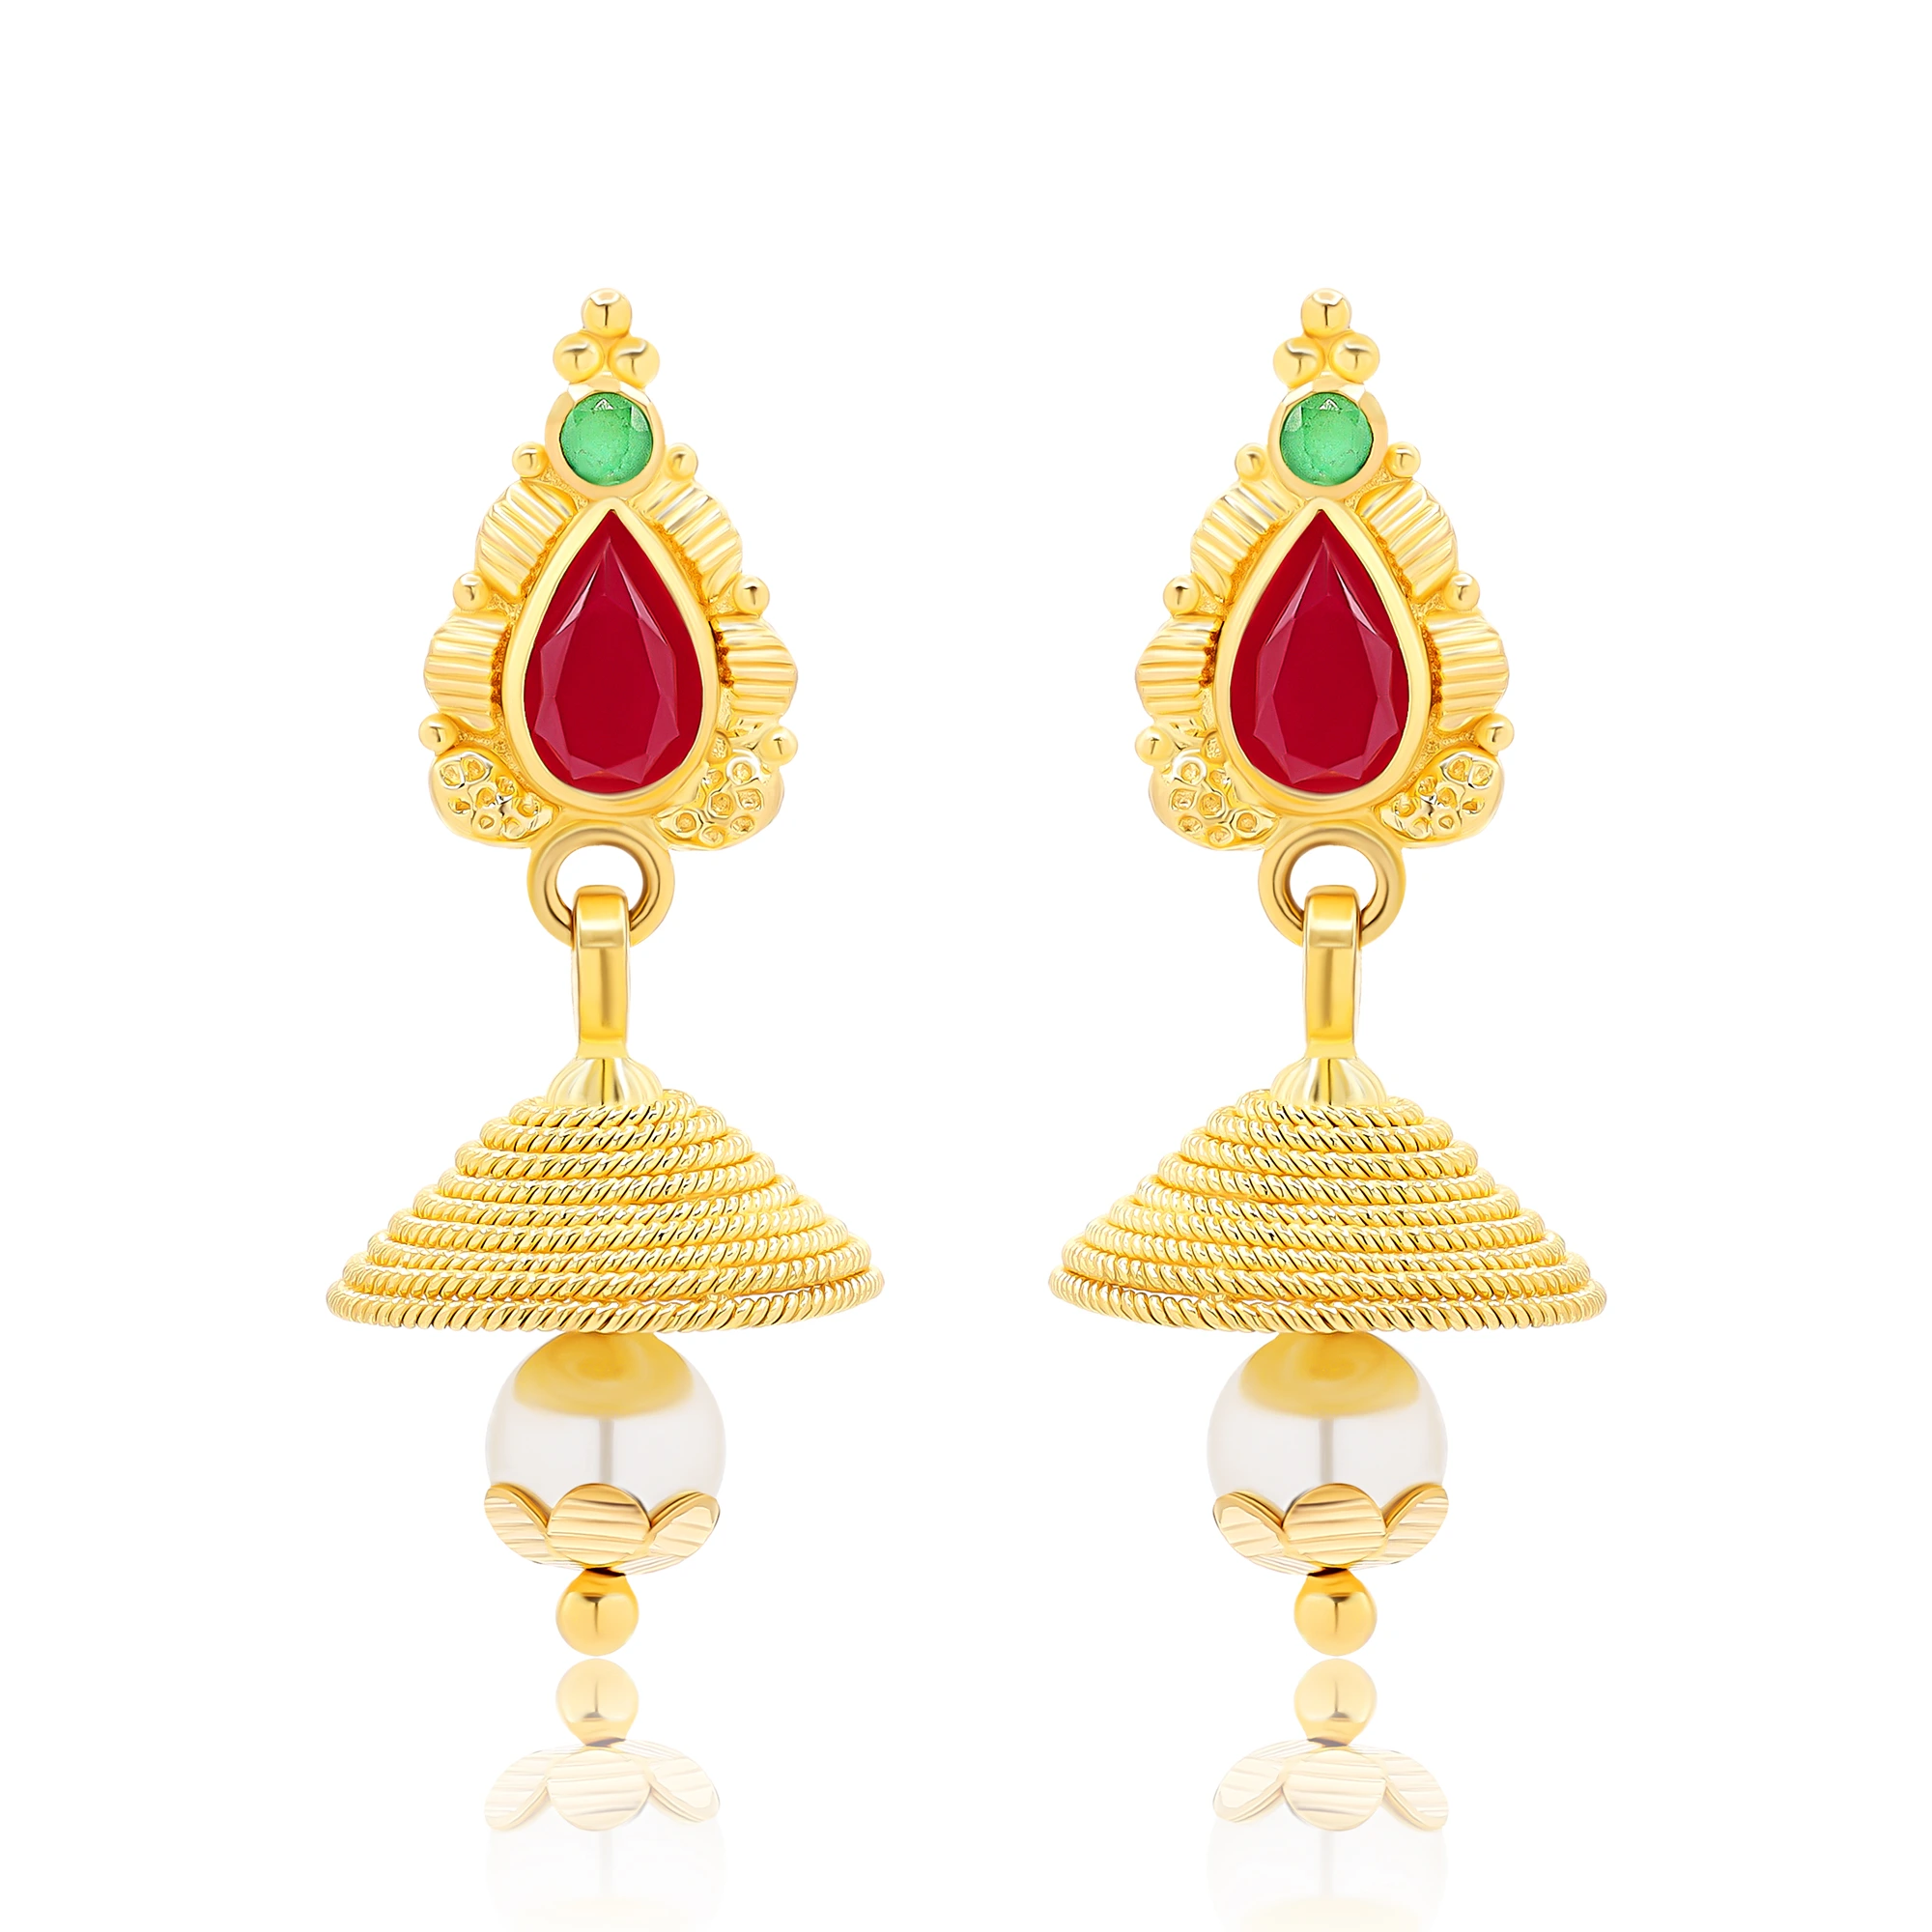 Buy Zukhruf Beautiful Attractive Big Kundan Jhumka earrings for Girls and  Women Online In India At Discounted Prices